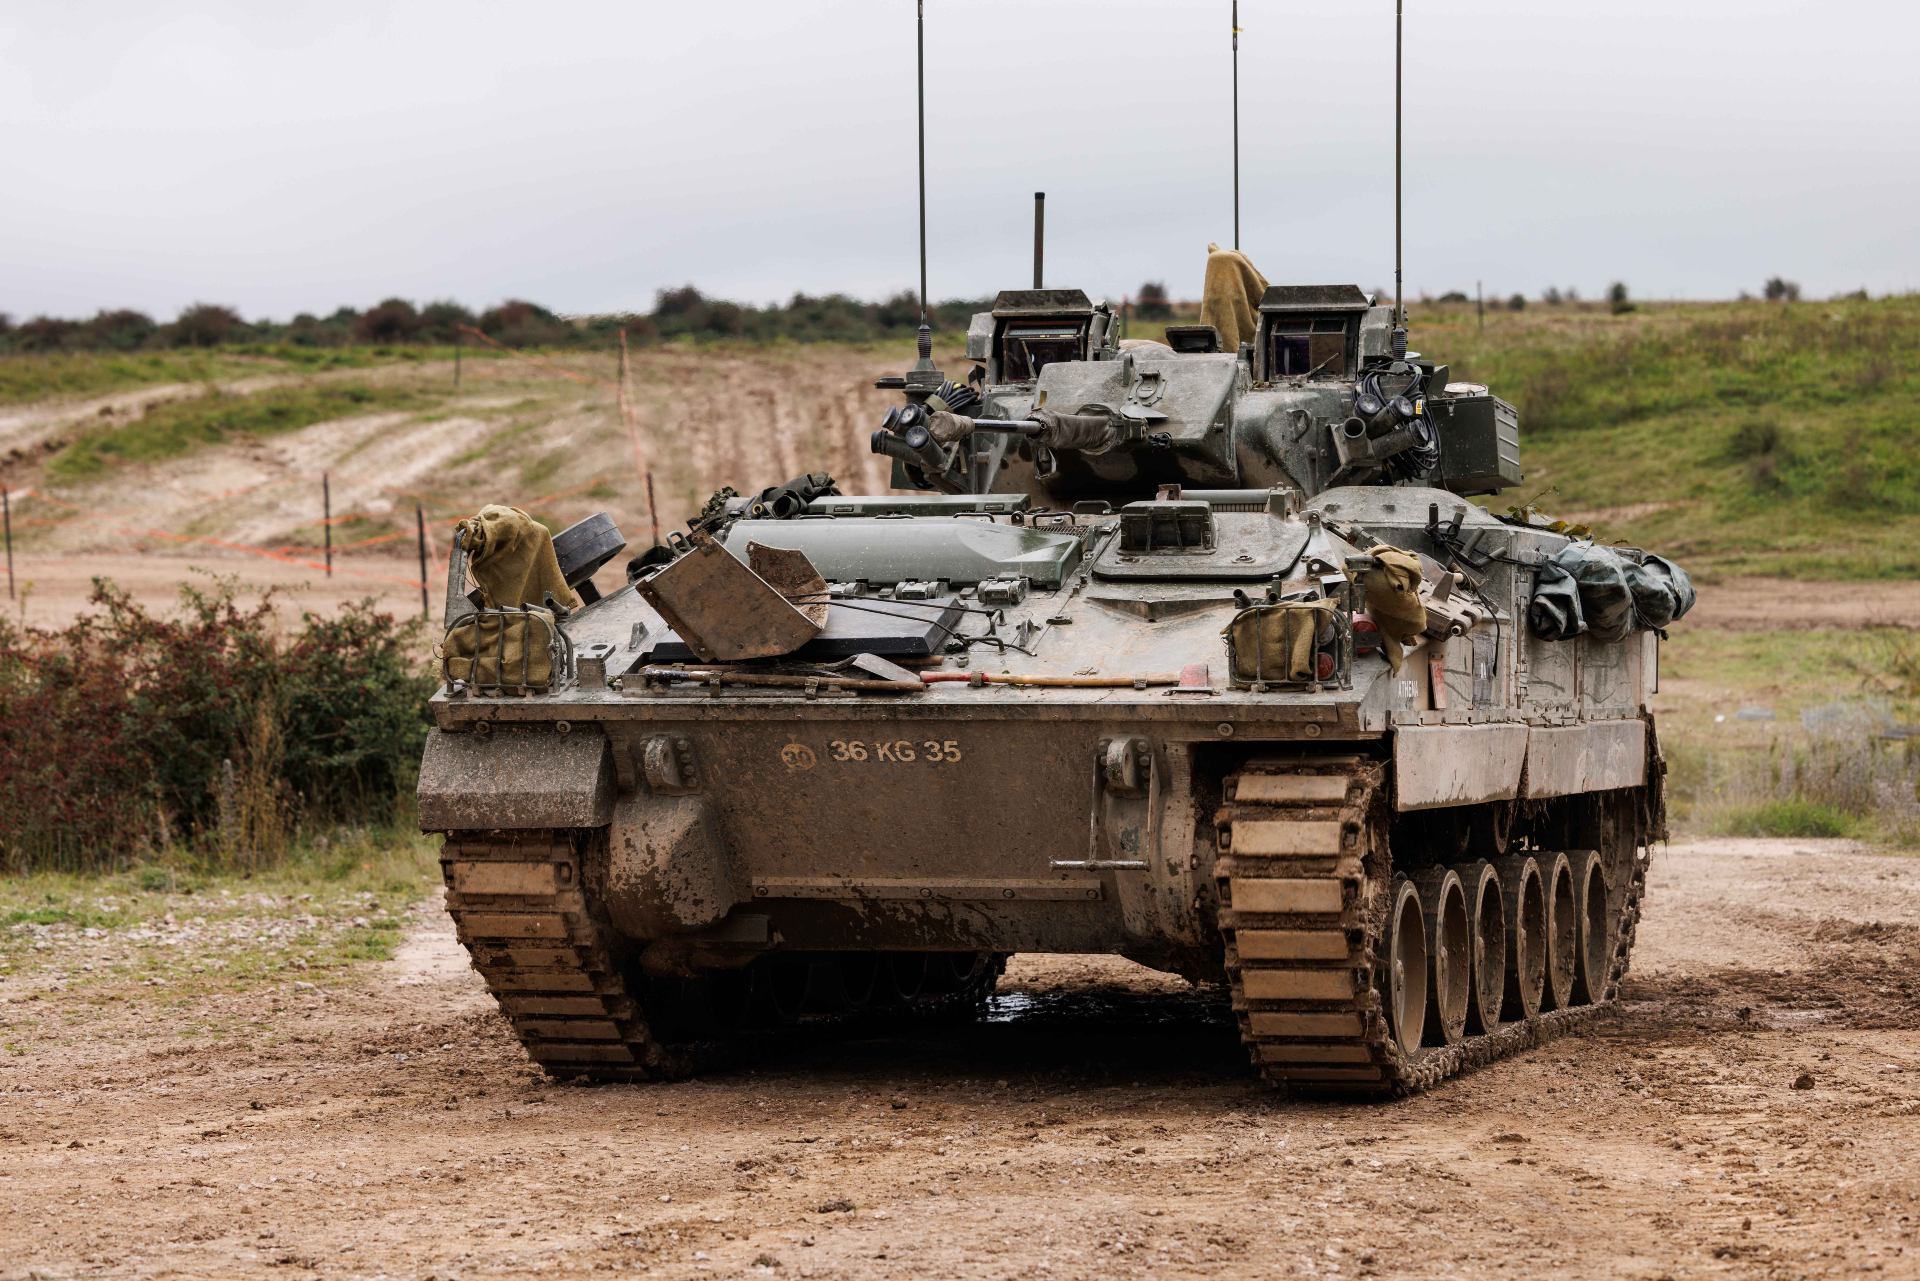 Pictured: A Warrior Infantry Fighting Vehicle imoves into position during Ex Iron Titan on Salisbury Training area near West Down camp. Ex IRON TITAN (Ex IT23) is a scenario driven exercise that coheres the training of the 3(UK) Divisions enabling elements. Ex IRON DIABOLO, a sub-exercise within Ex IT23 will validate 21 Engineer Regiment as the Divisional Engineer Regiment and 26 Engineer Regiment ahead of their deployment to Poland on Op LINOTYPER in early 2024. The exercise targets technical engineering, with a focus on those tasks which are difficult to deliver at the Battlegroup FTX level such as: Wet Wide Gap Crossing (WWGC) part of the Battle Craft Syllabus (BCT), Amphibious and Boat operations as well as construction of other facilities.